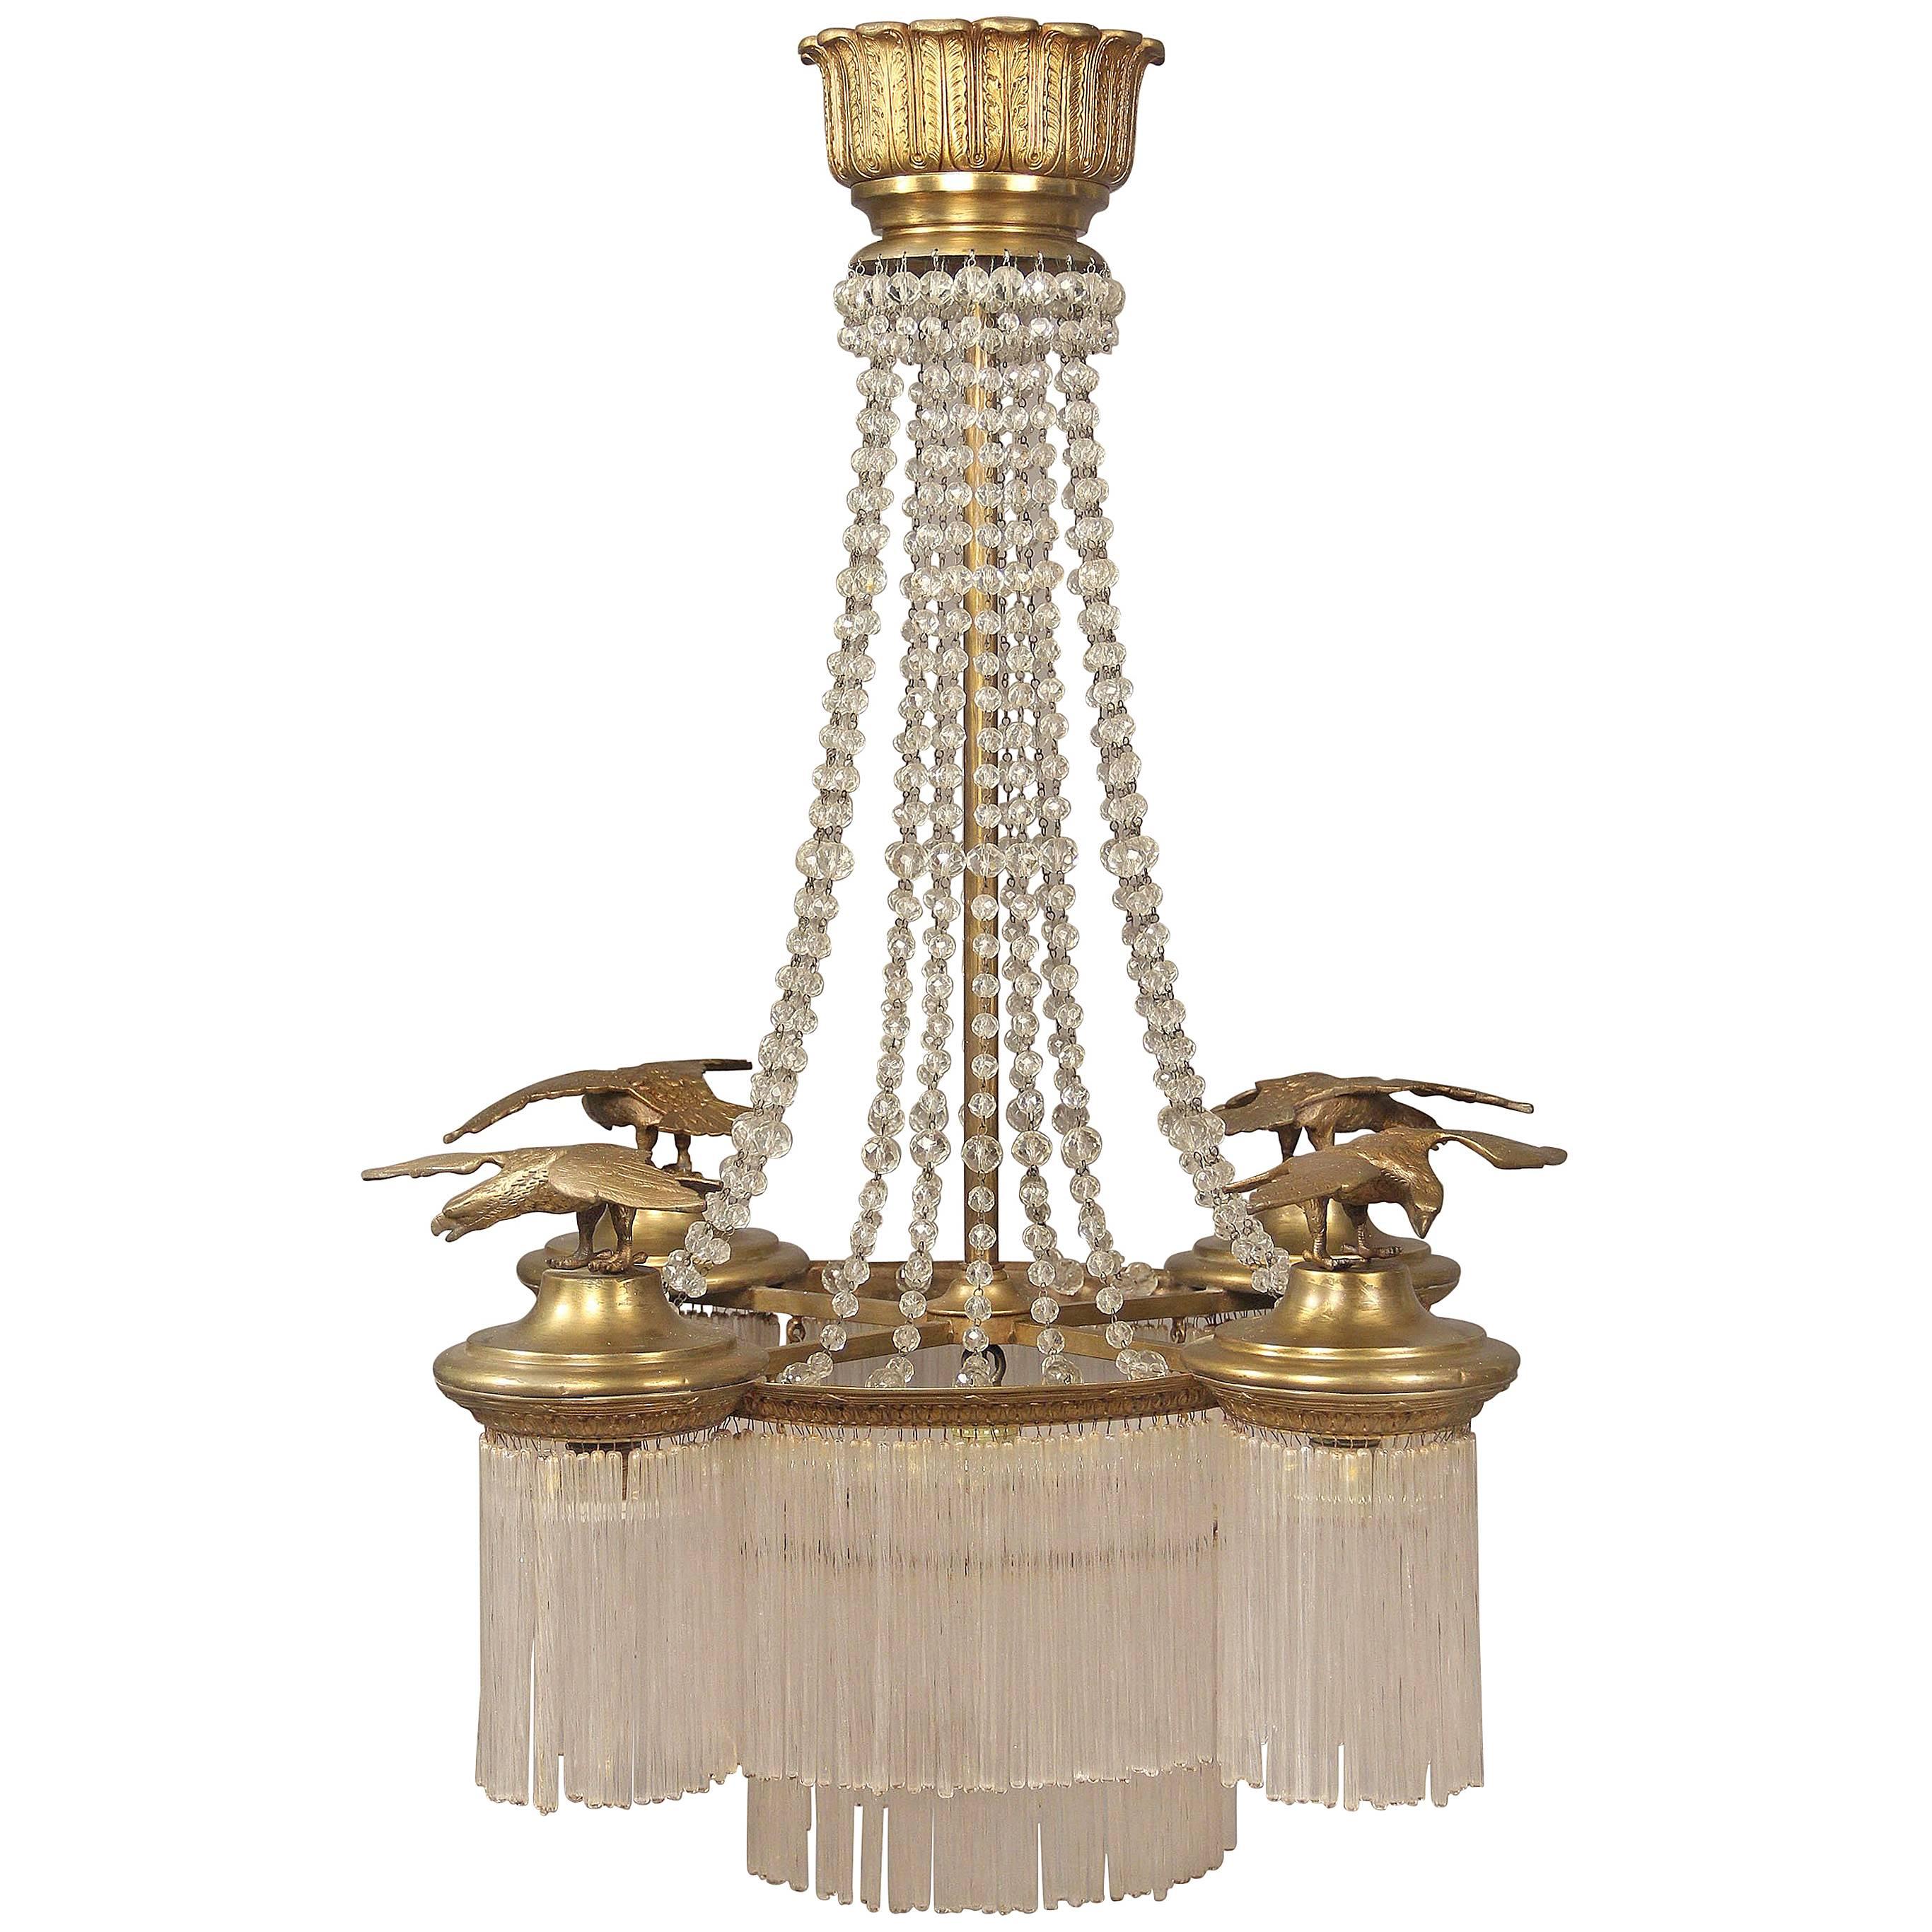 Interesting Late 19th Century Gilt Bronze and Crystal Five-Light Chandelier